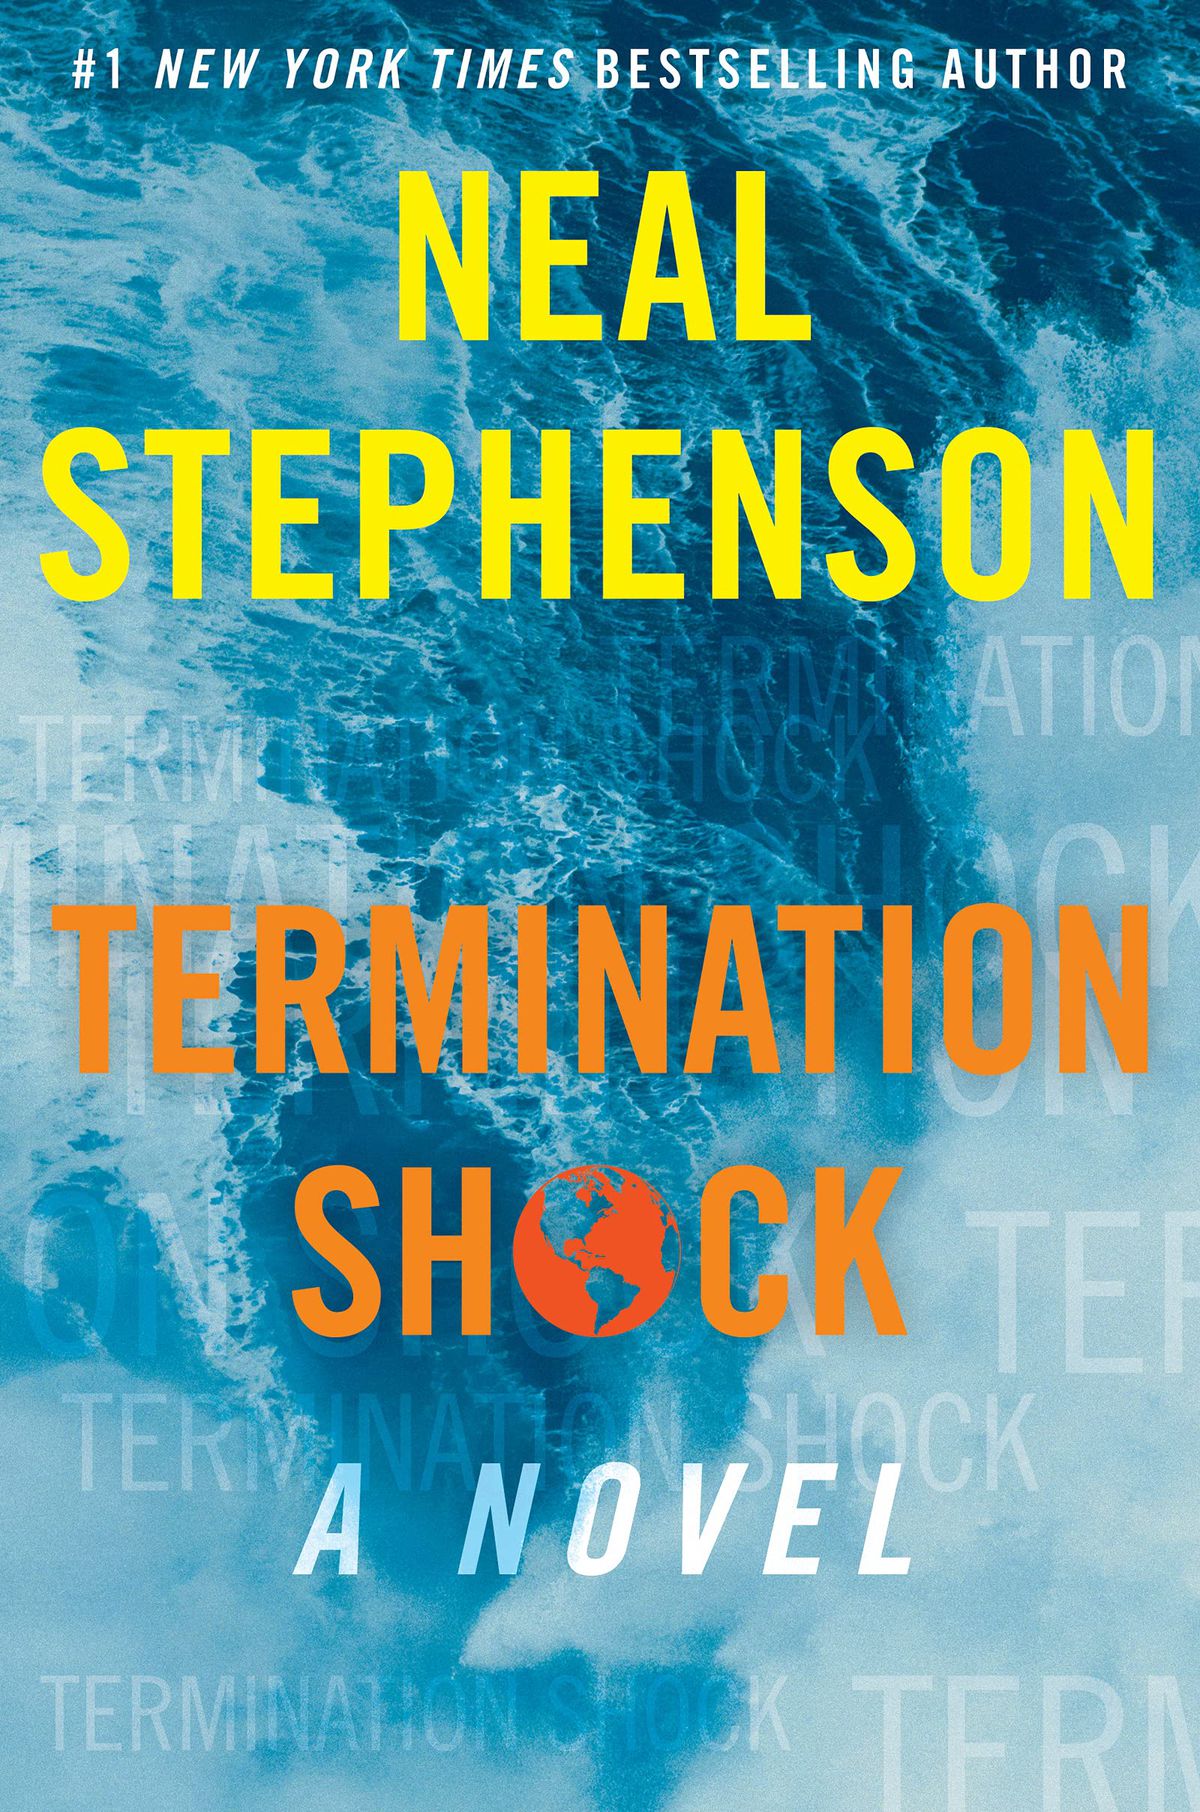 Termination Shock by Neal Stephenson book cover